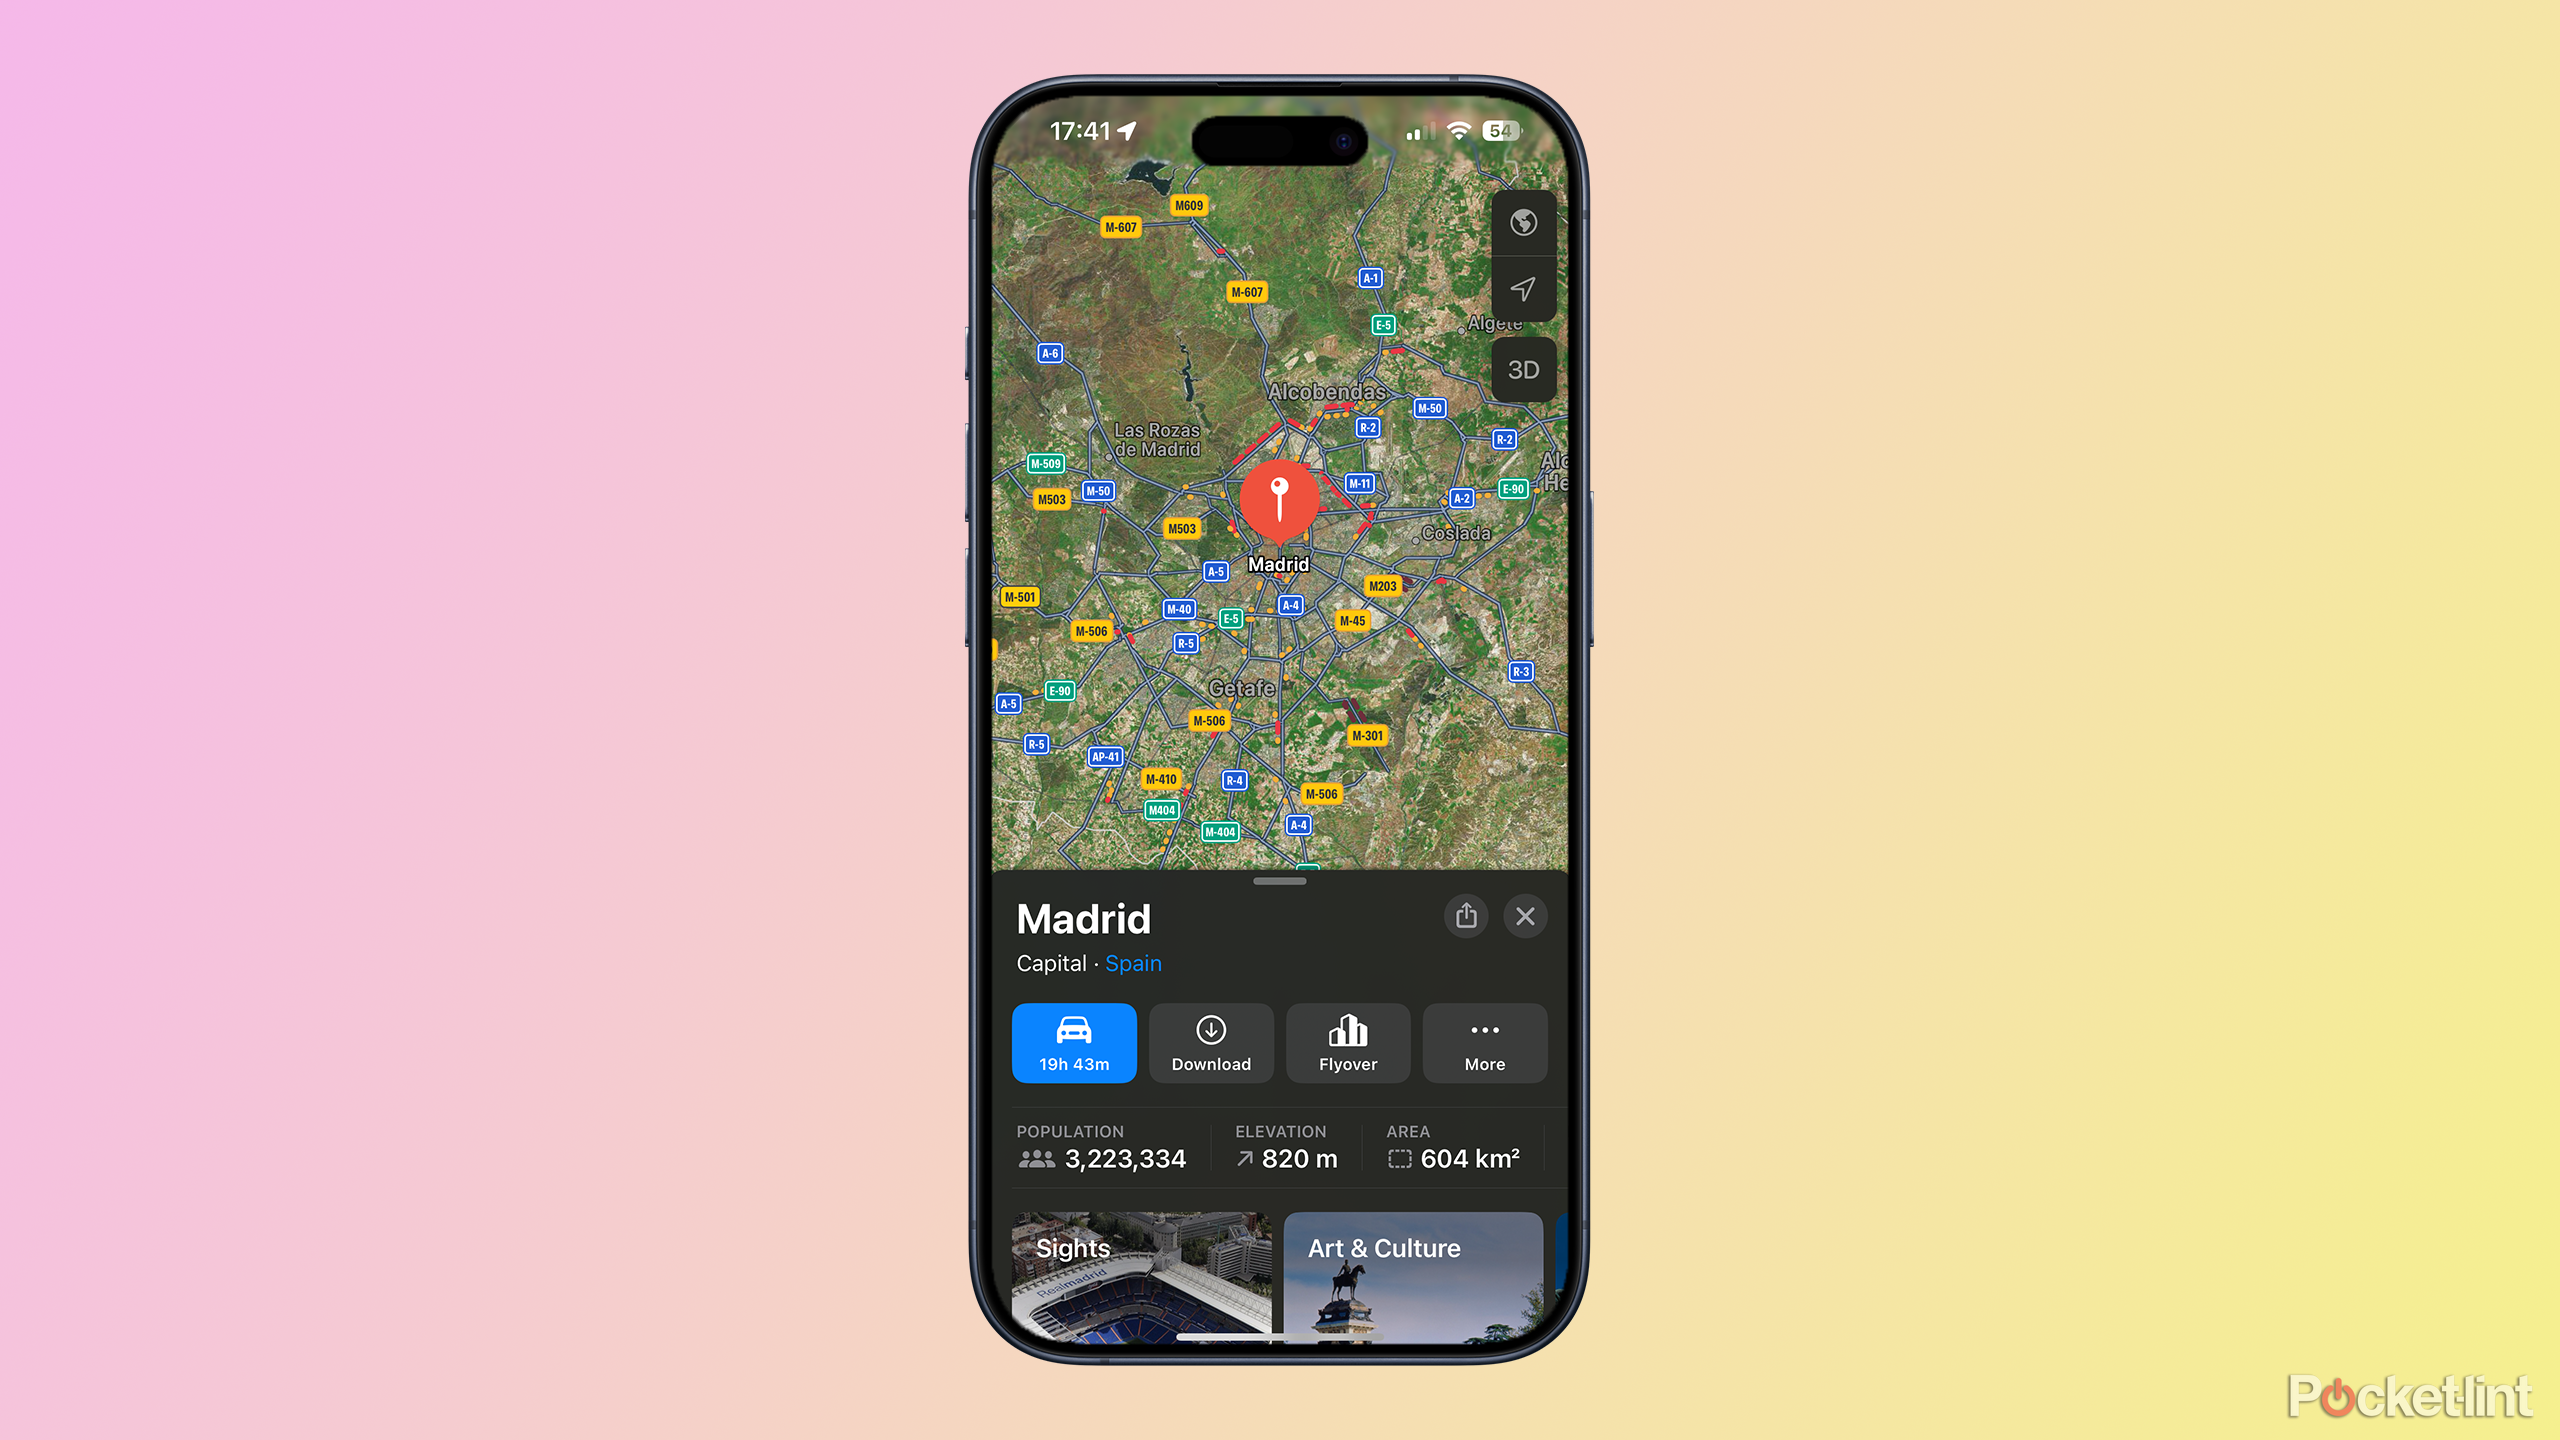 elevation info in apple maps on iphone 15 pro